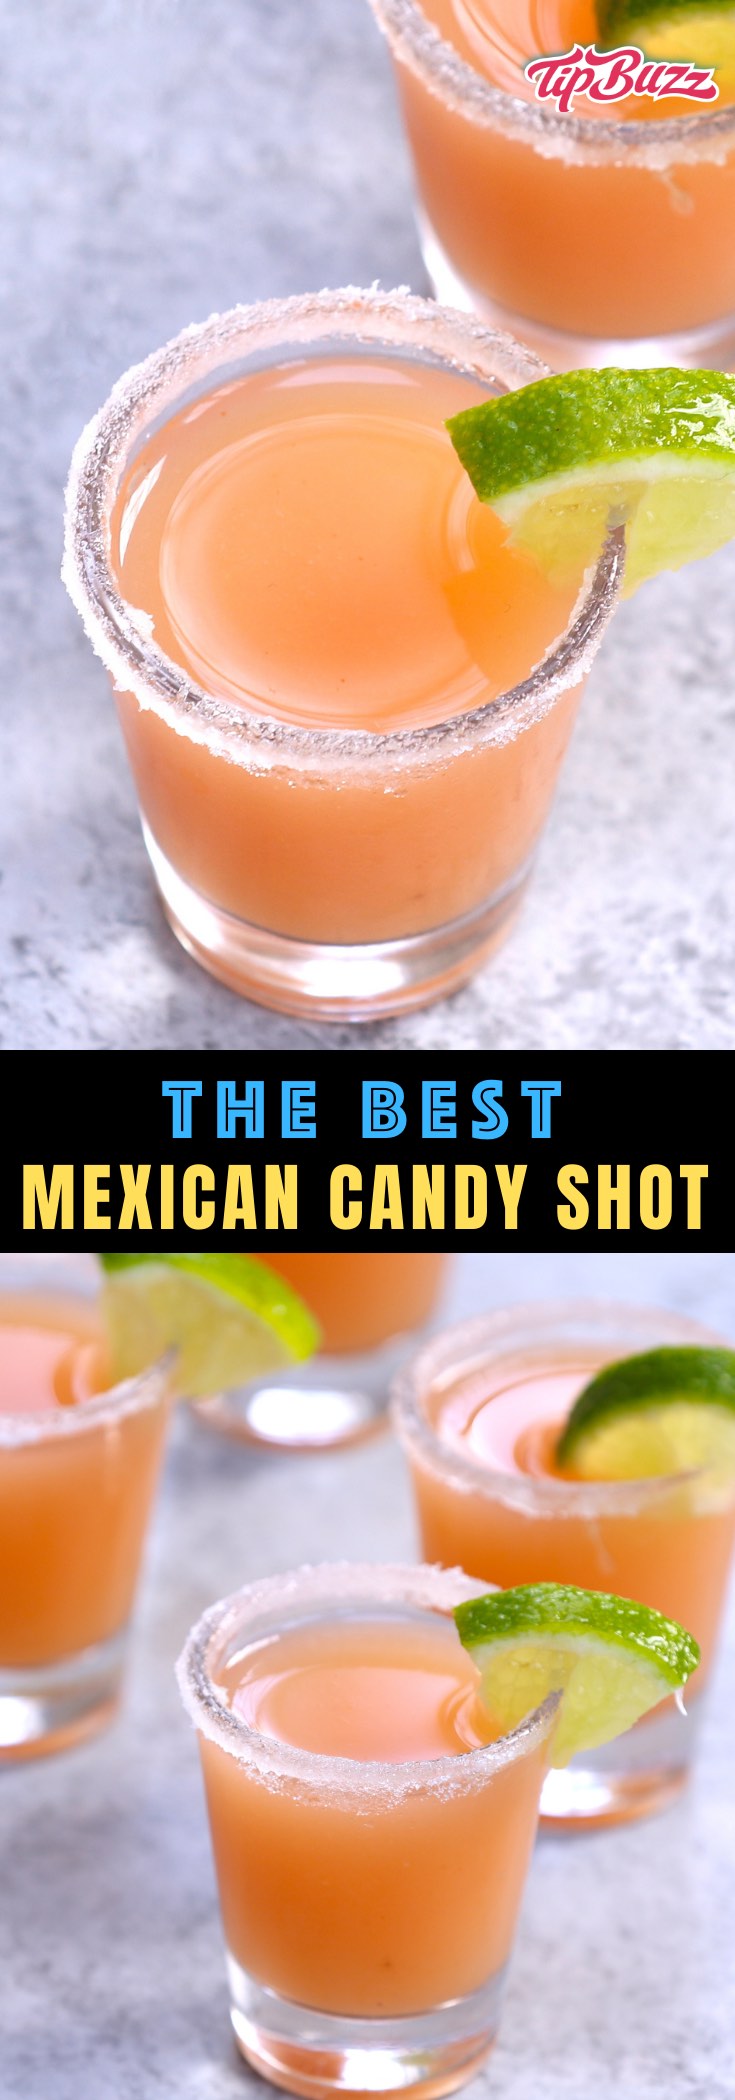 Mexican Candy Shot is sure to impress your family and friends at your next dinner party! It’s sweet and slightly spicy with lots of fruity flavors. This recipe is easy to make, and you can customize it with different flavors like watermelon, strawberry, or guava juice. 